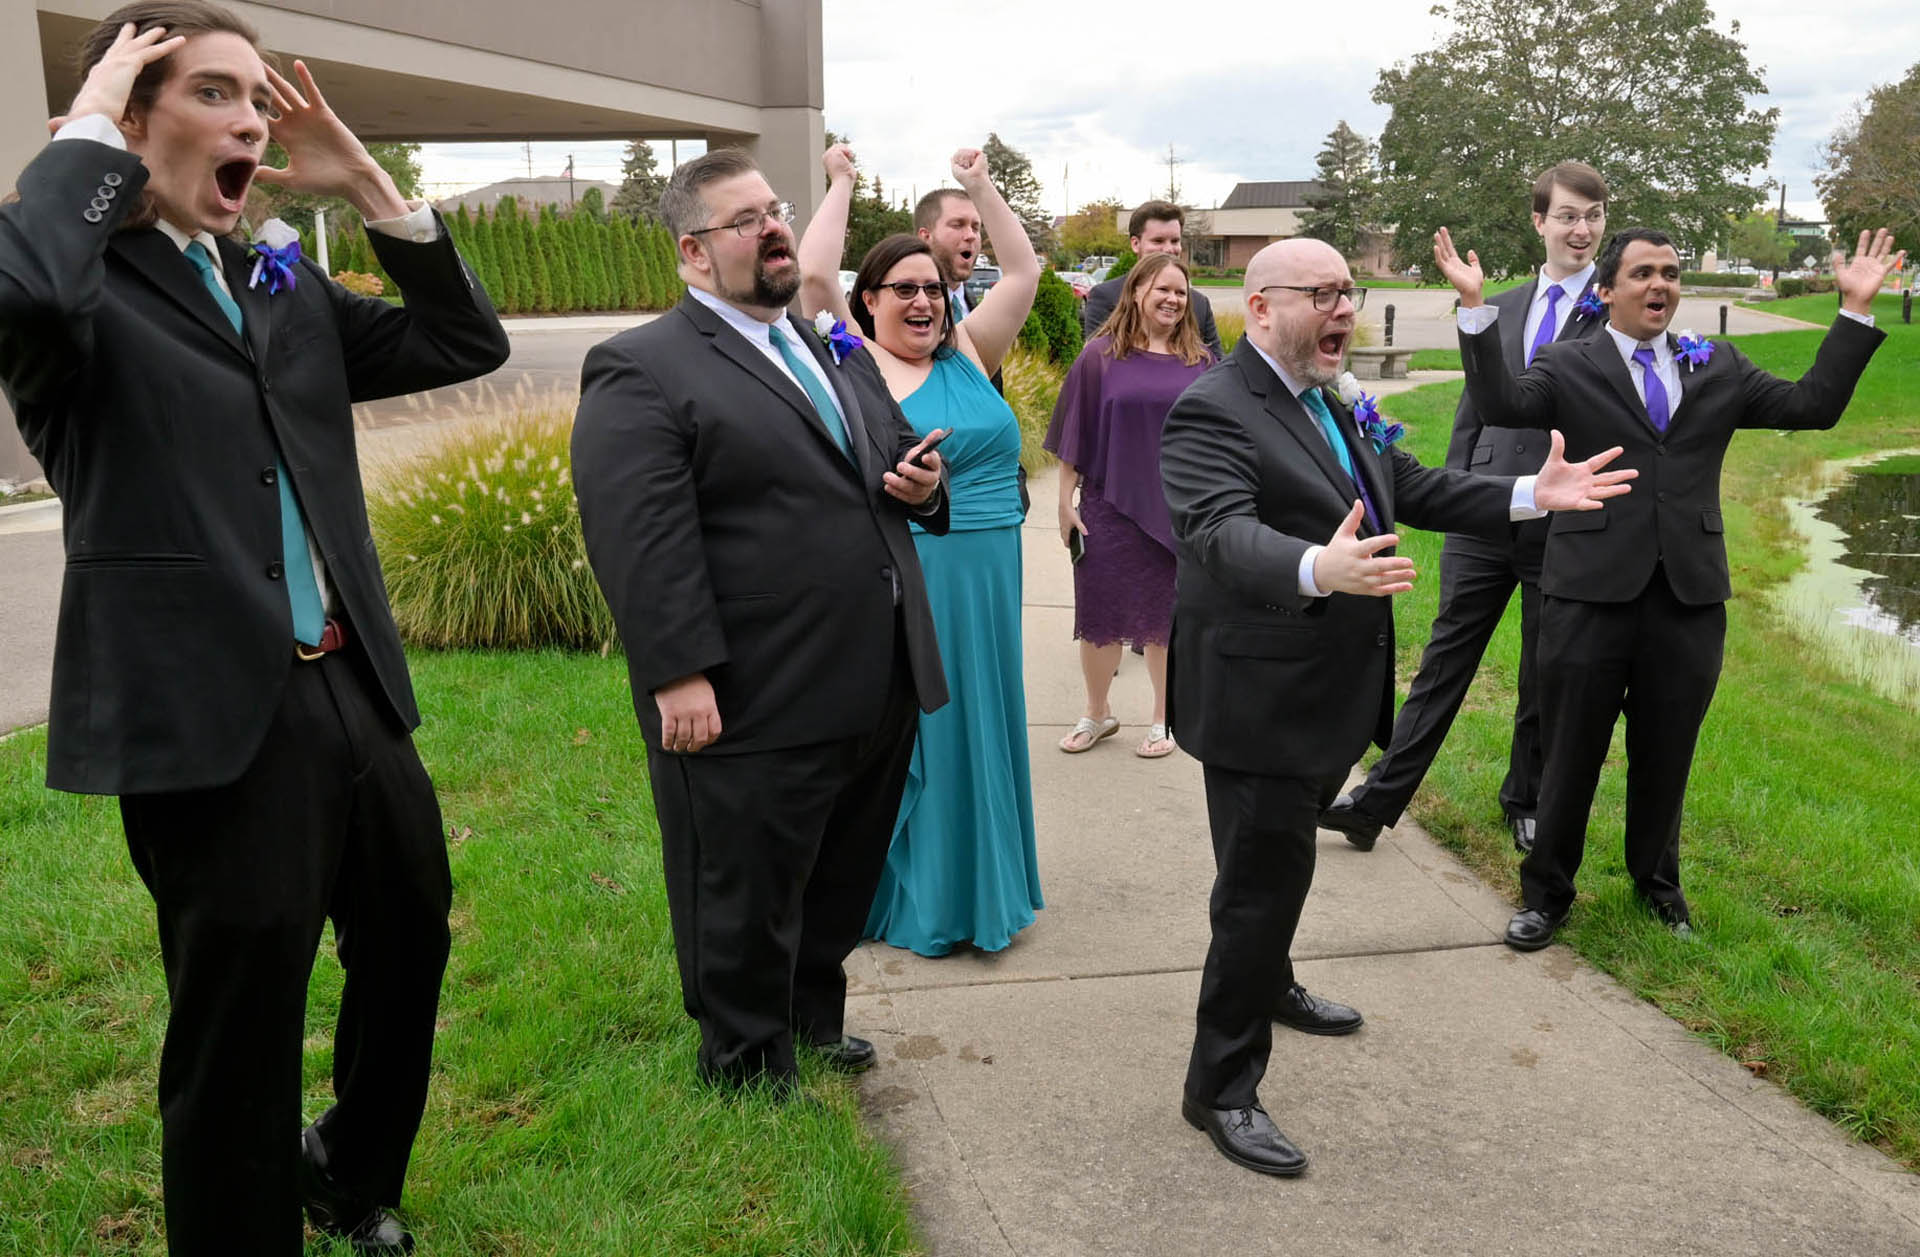 The bridal party react to seeing the brides 